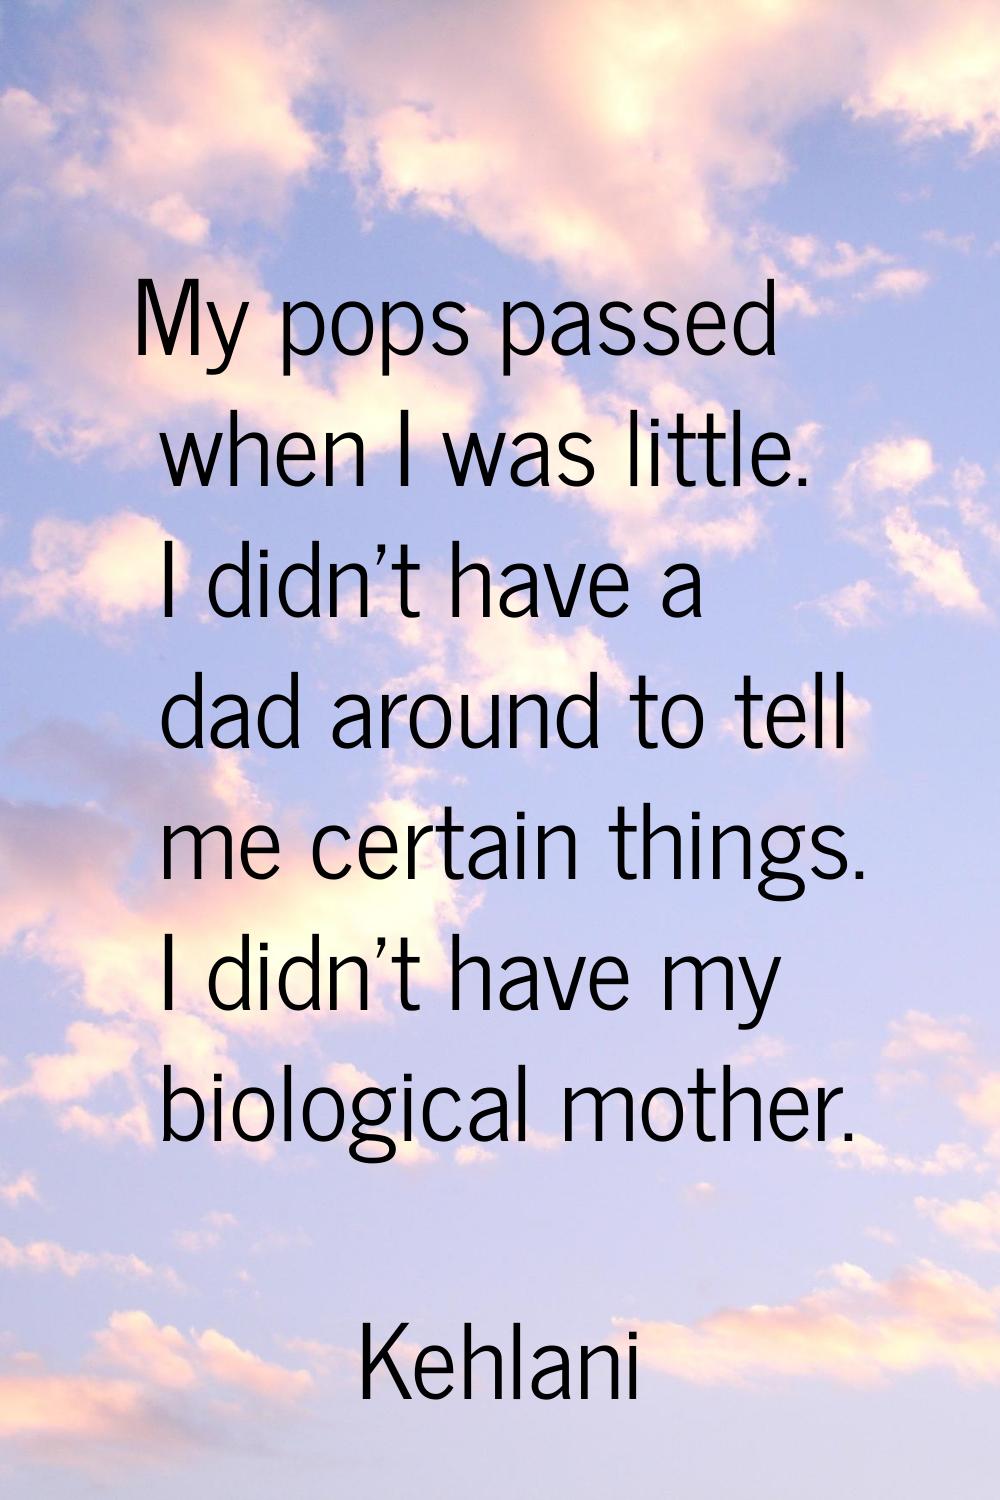 My pops passed when I was little. I didn't have a dad around to tell me certain things. I didn't ha